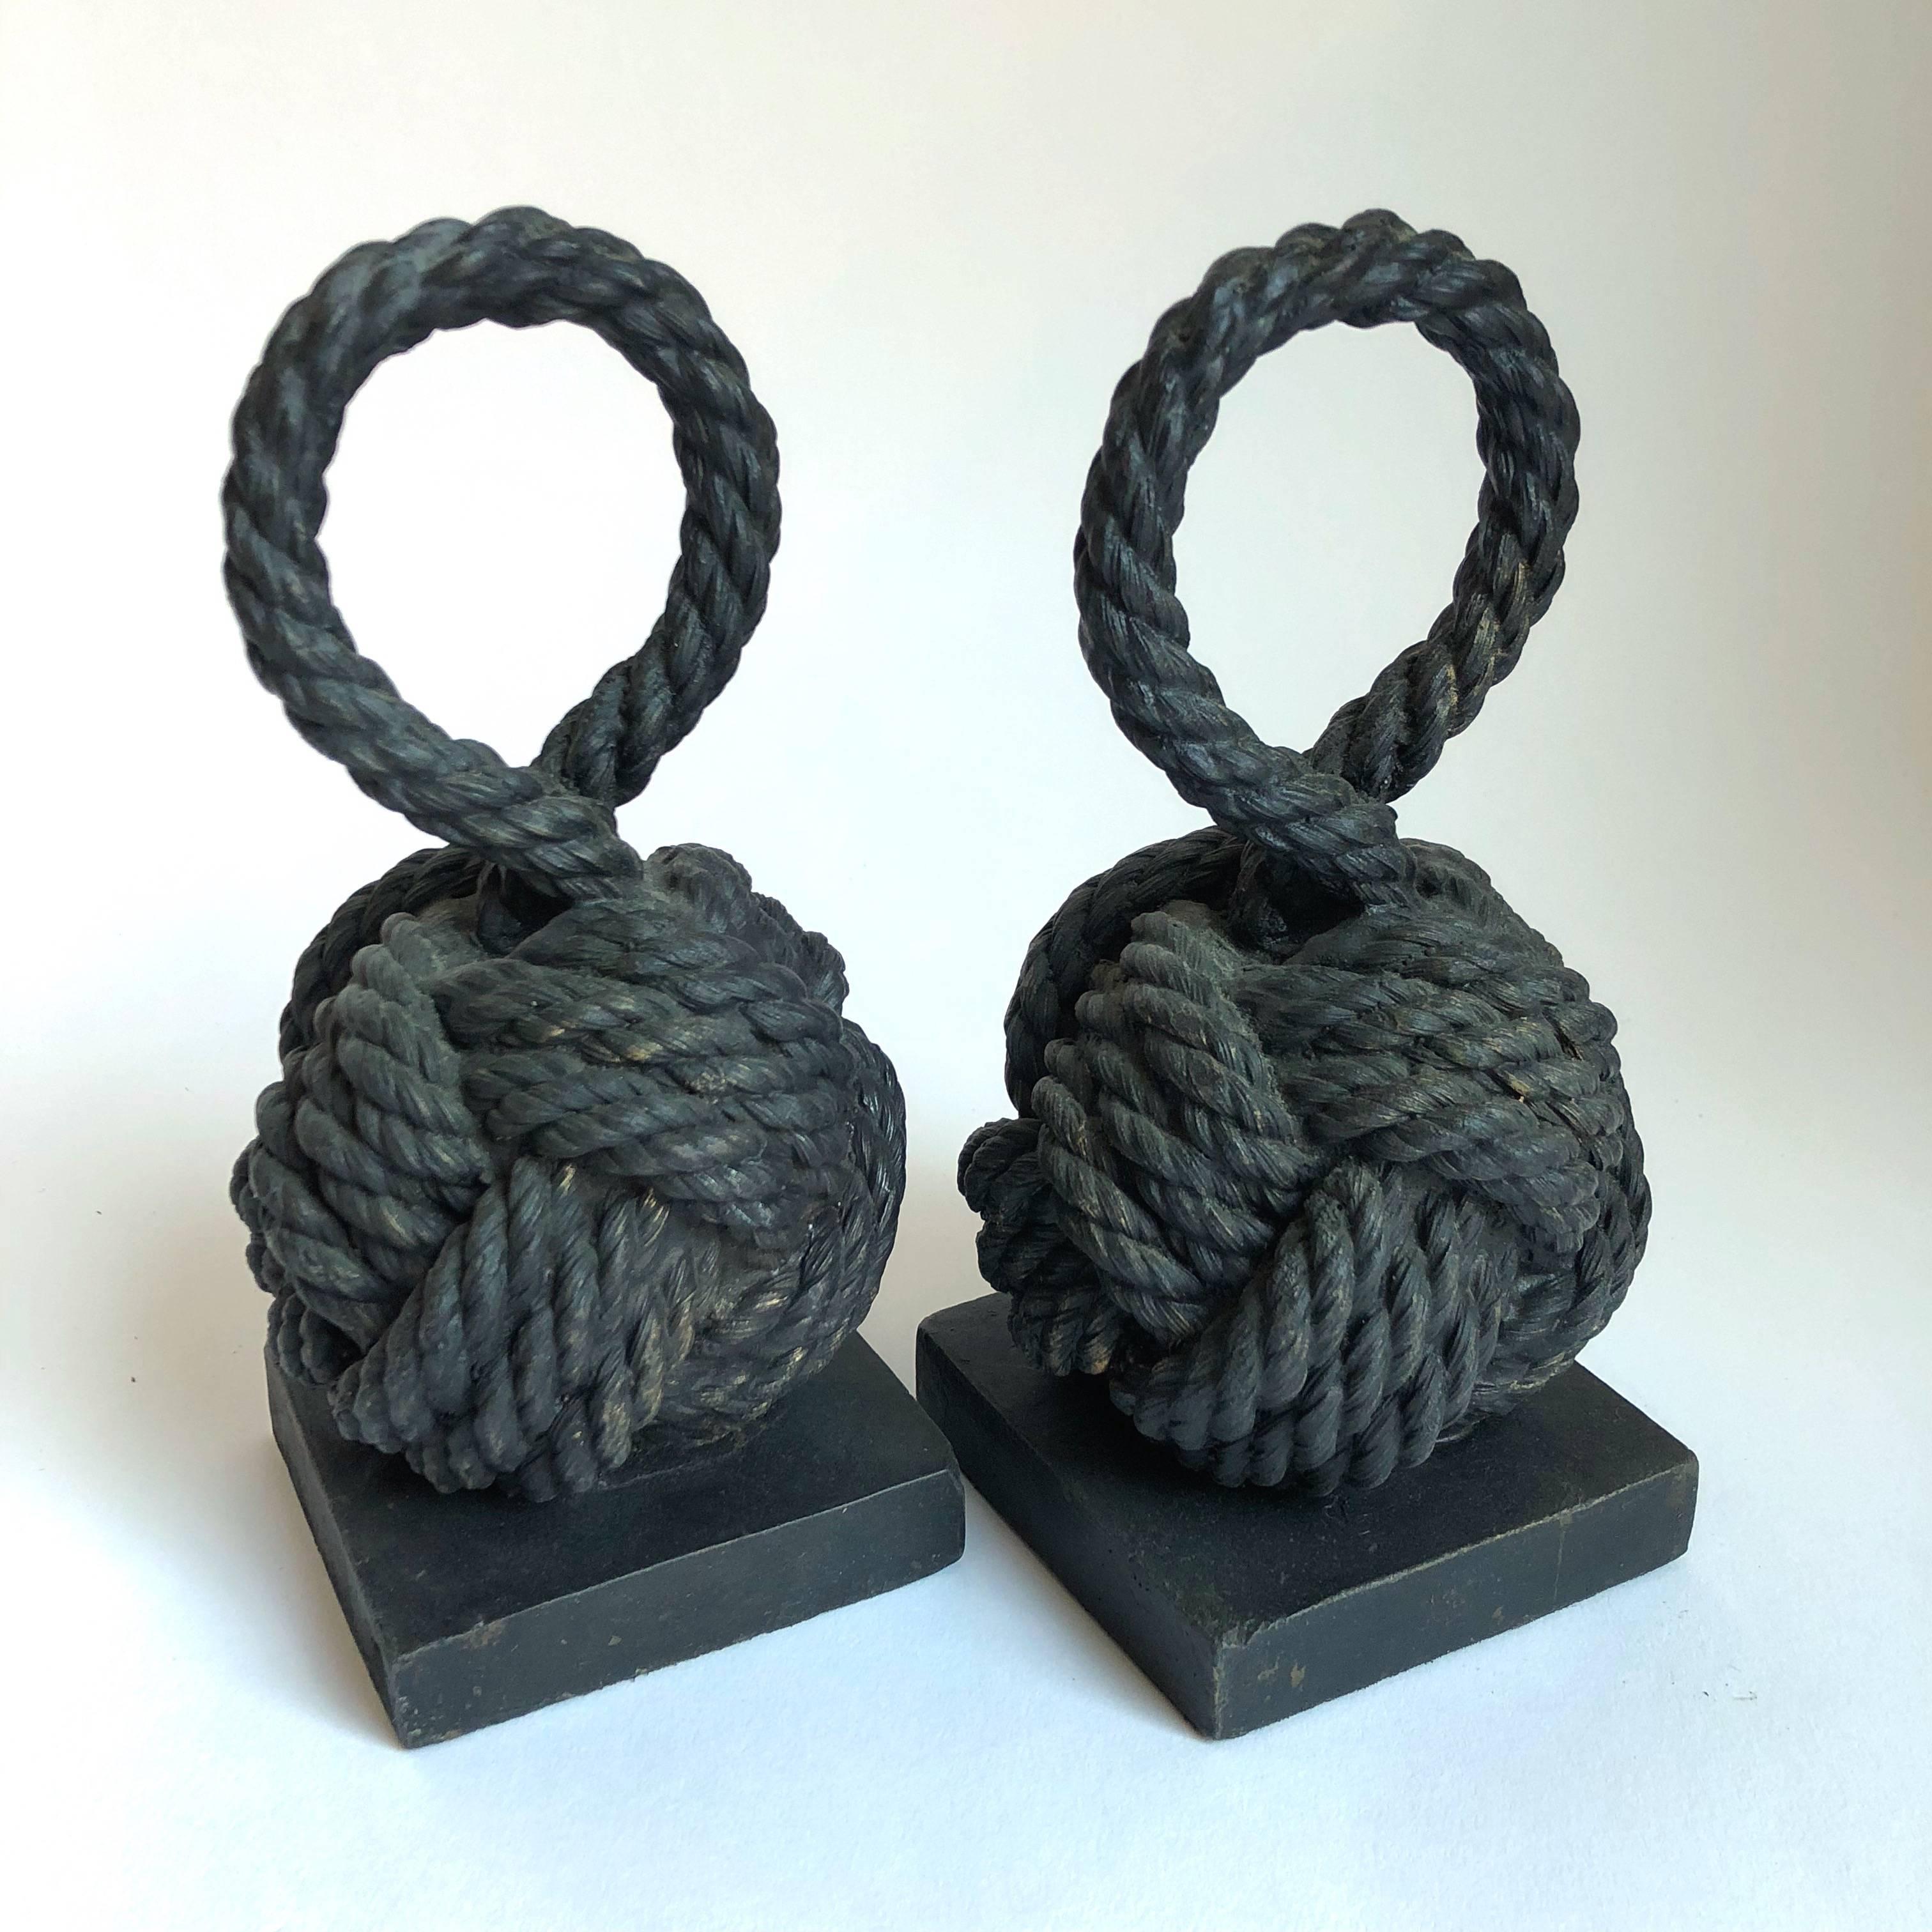 Pair of Bronze Monkey Fist Knot Bookends 3